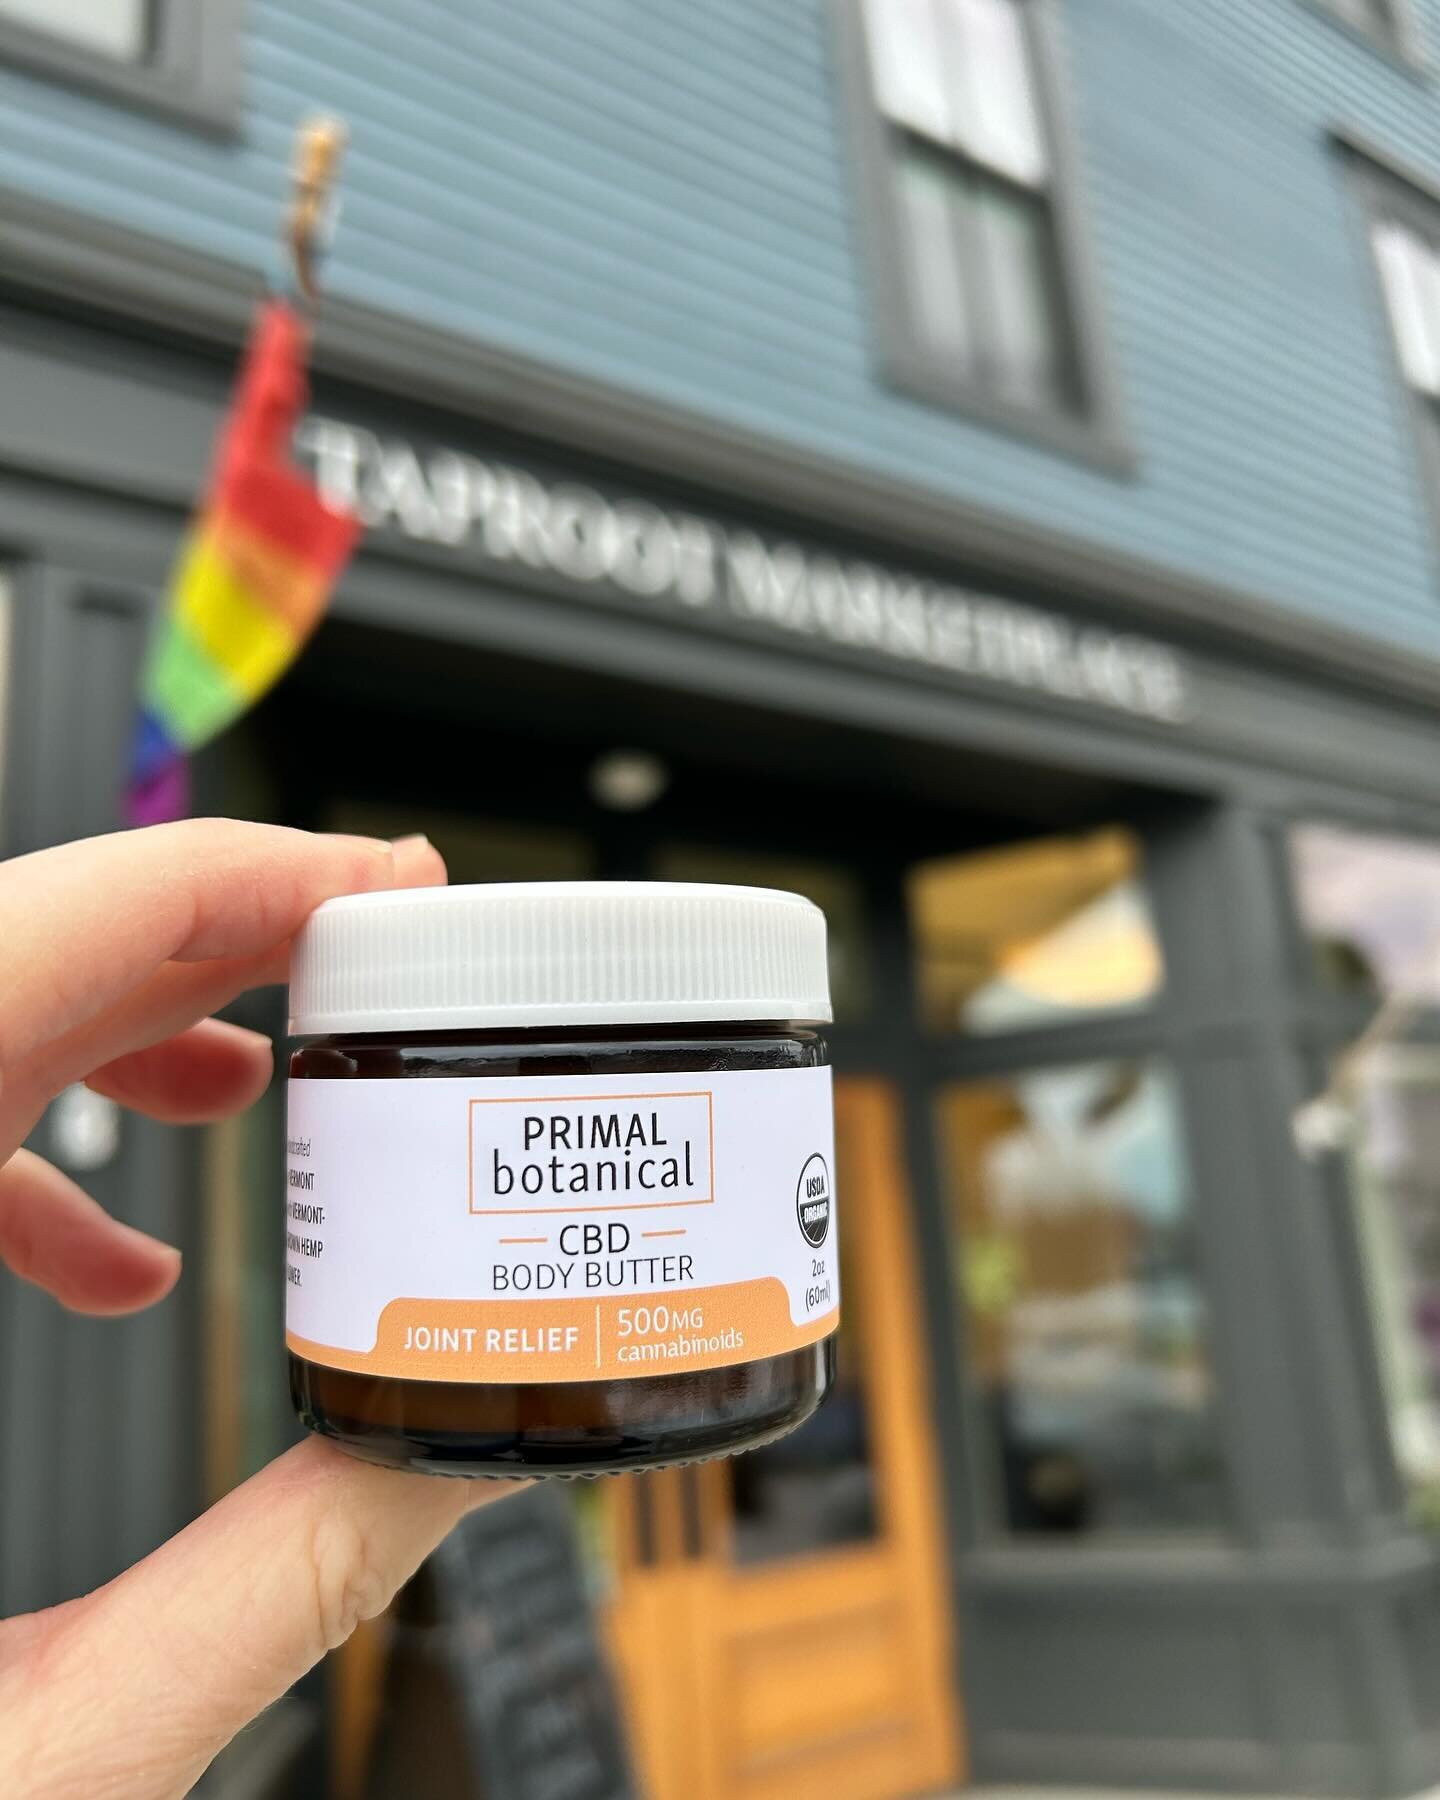 Good news for New Hampshirites! You can now get Primal Botanical CBD oils and body butters at @taprootnh in Lancaster! 😃

If you&rsquo;ve never visited the Taproot Marketplace, you&rsquo;re in for a treat. They have an amazing selection of locally p